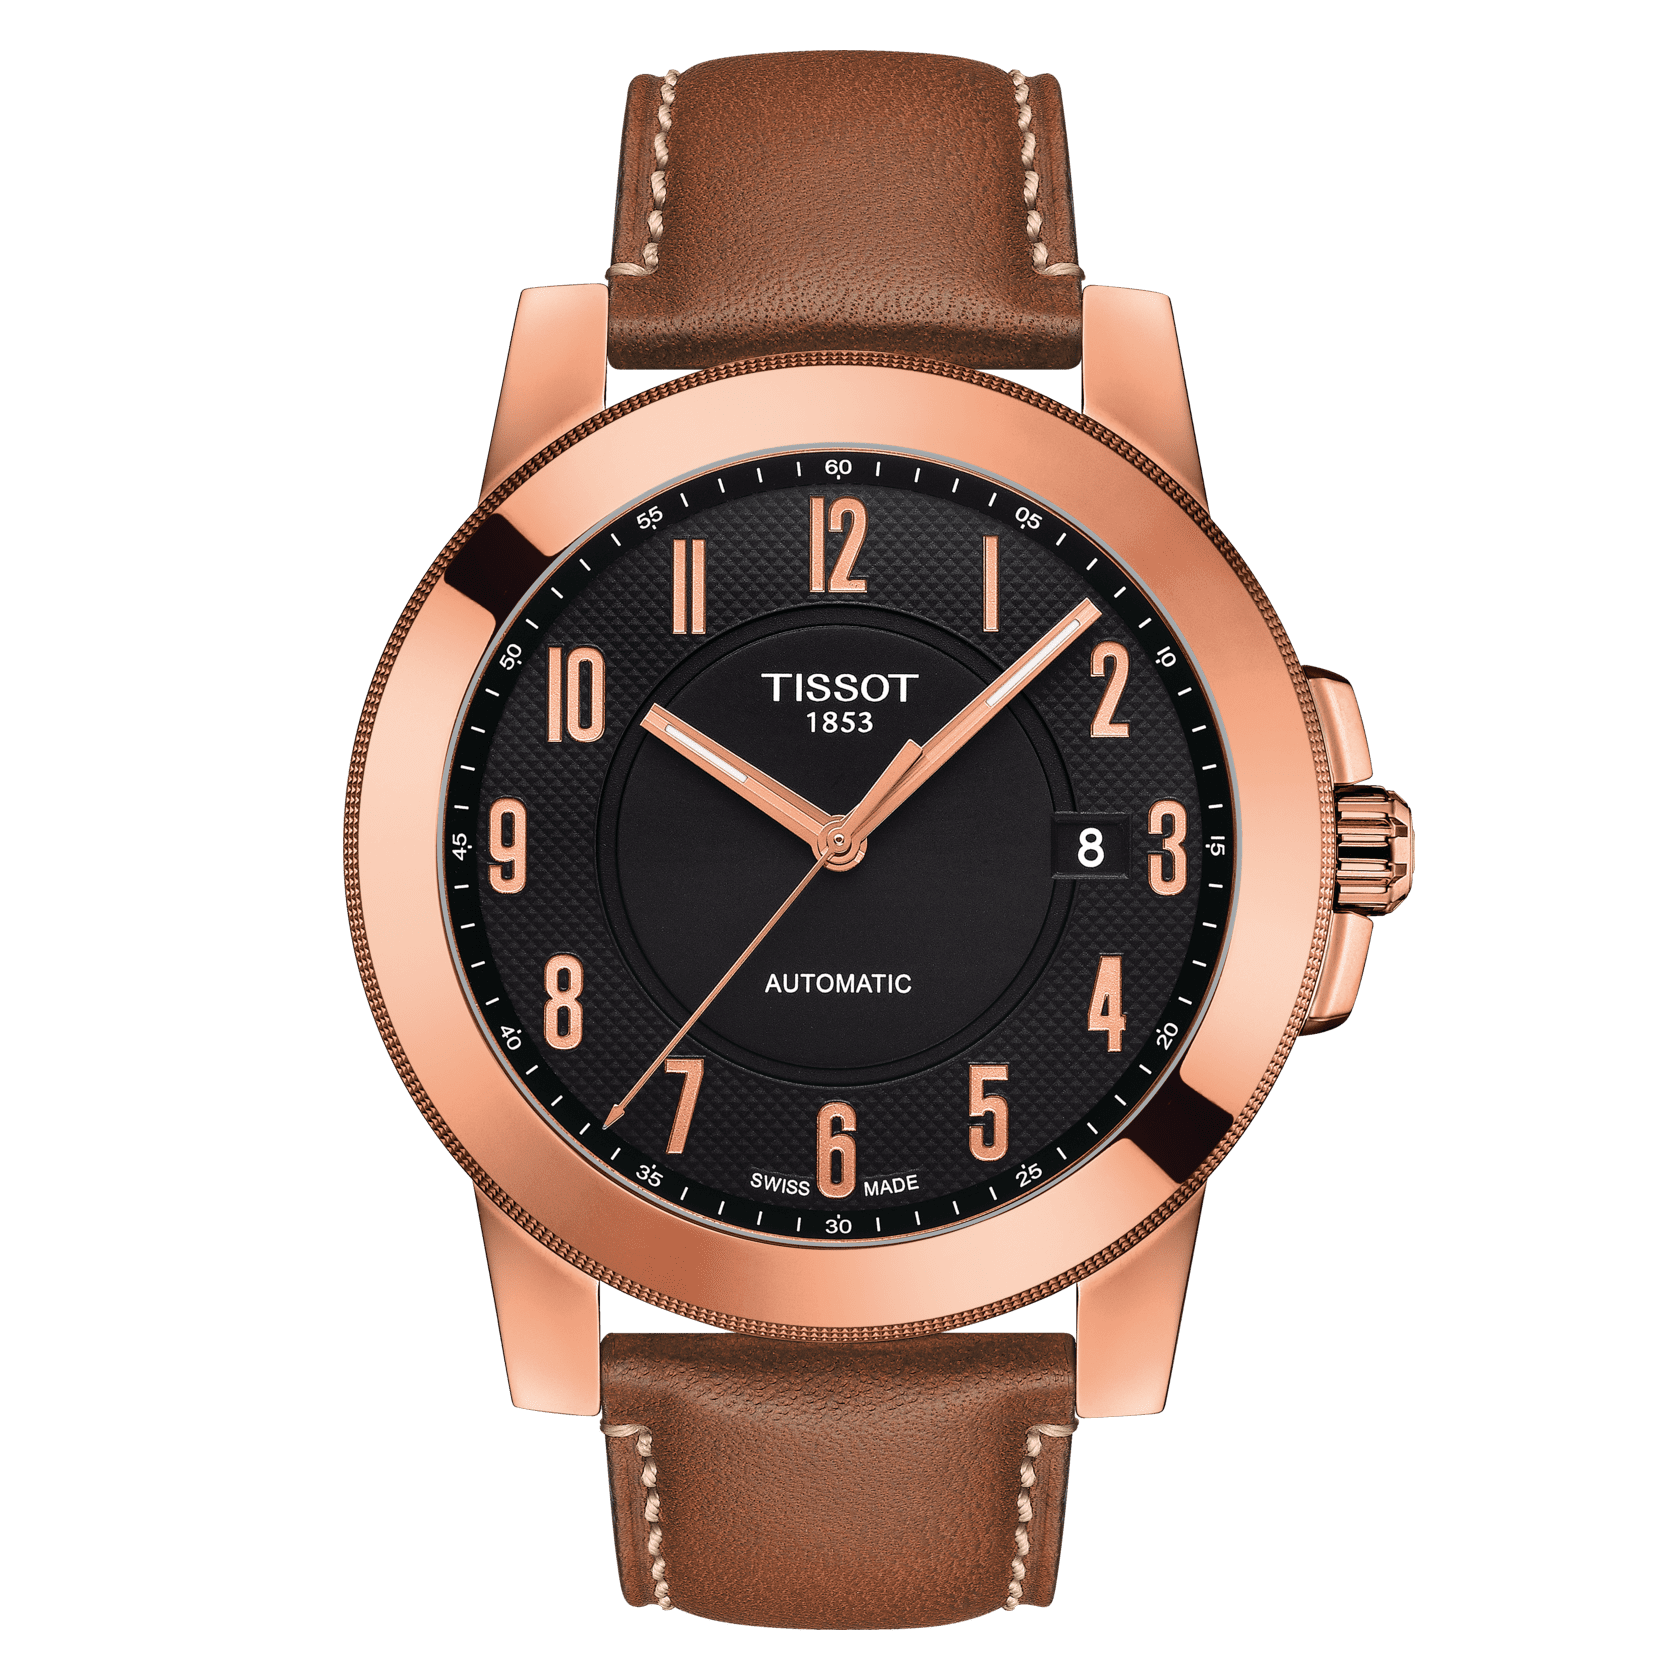 Top Quality Replica Swiss Watches